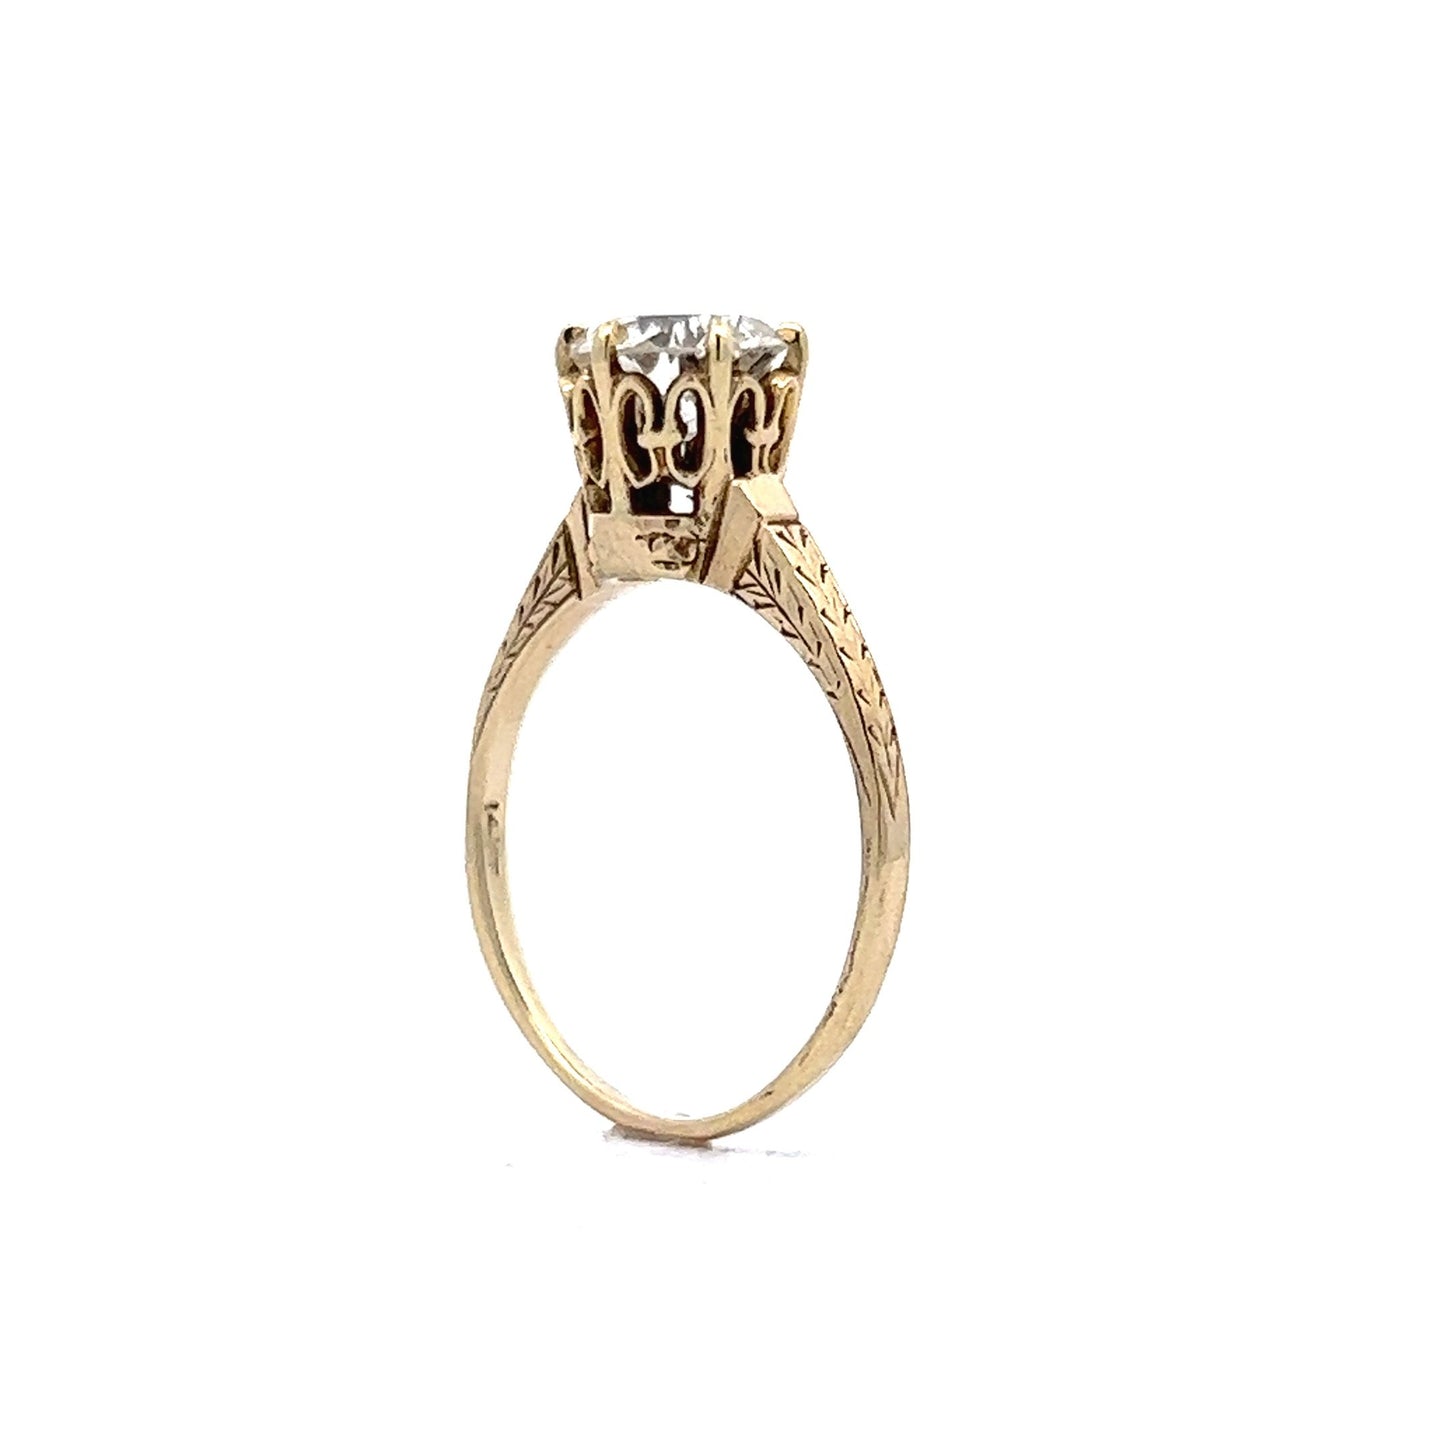 1.26 Solitaire Art Deco Diamond Engagement Ring in 14k Gold